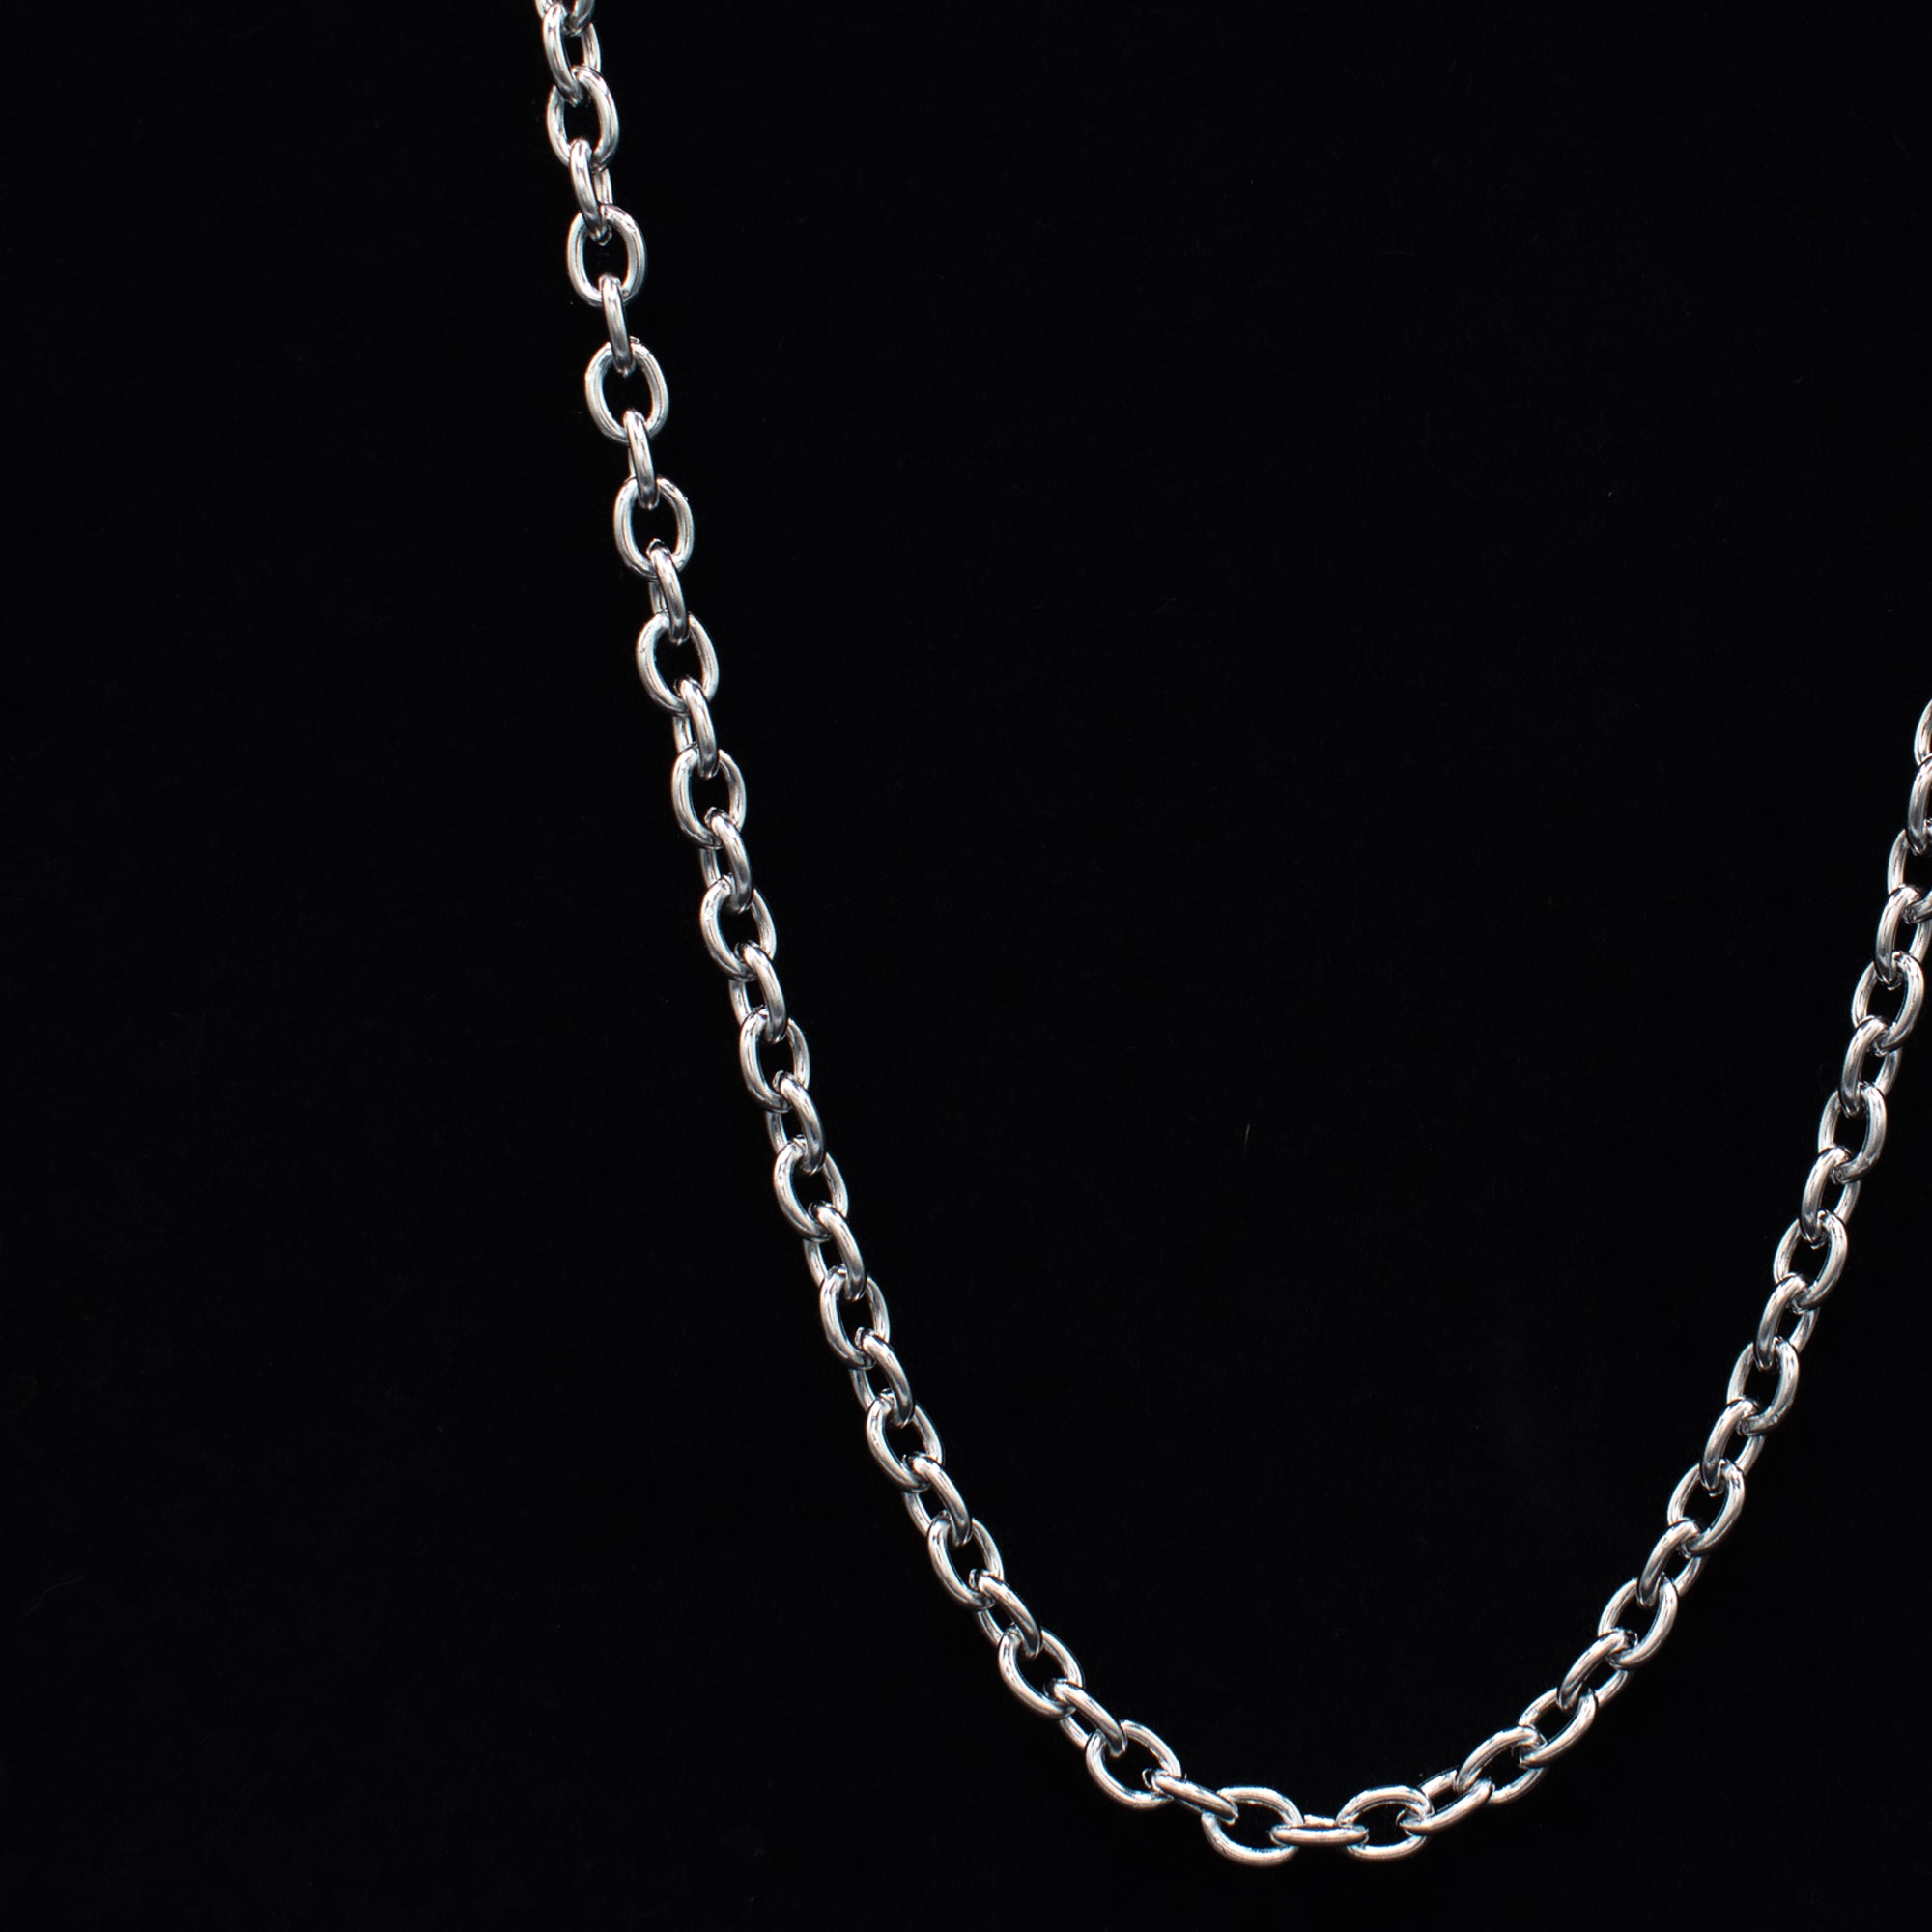 Cable Chain Necklace - (Silver) 6mm